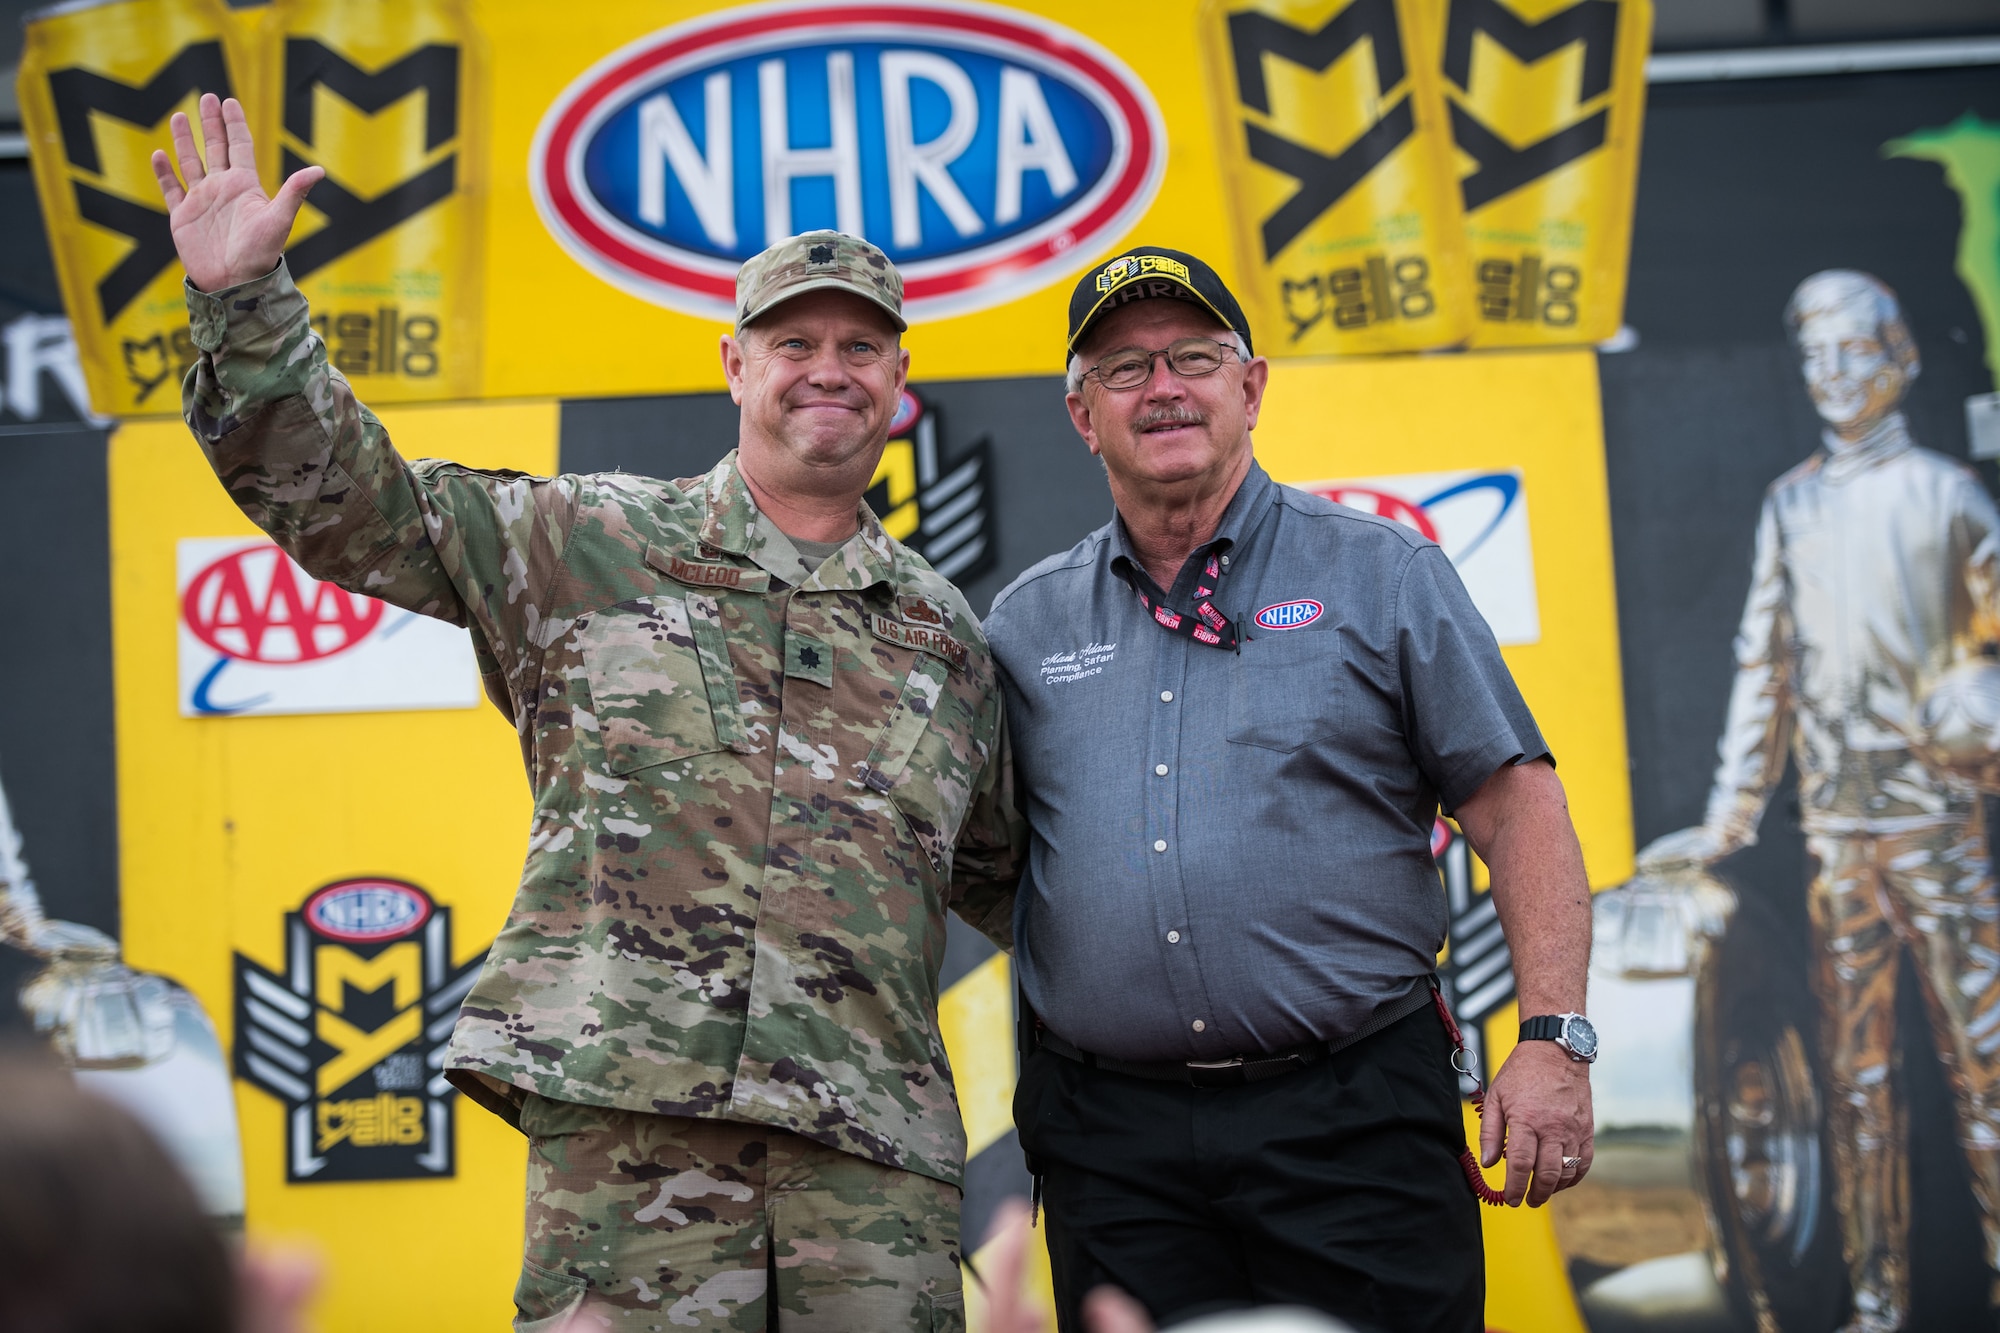 Lt. Col. William McLeod, 932nd Maintenance Group commander, waves at the crowd with Mark Adams, National Hot Rod Association Safety, Event Planning and Compliance Officer during the opening ceremony for the NHRA Midwest Nationals Sept. 29, 2019, World Wide Technology Raceway at Gateway Motorsports Madison Illinois. McLeod was honored as a special guest for the day and presented a NHRA challenge coin. (U.S. Air Force photo by Master Sgt. Christopher Parr)